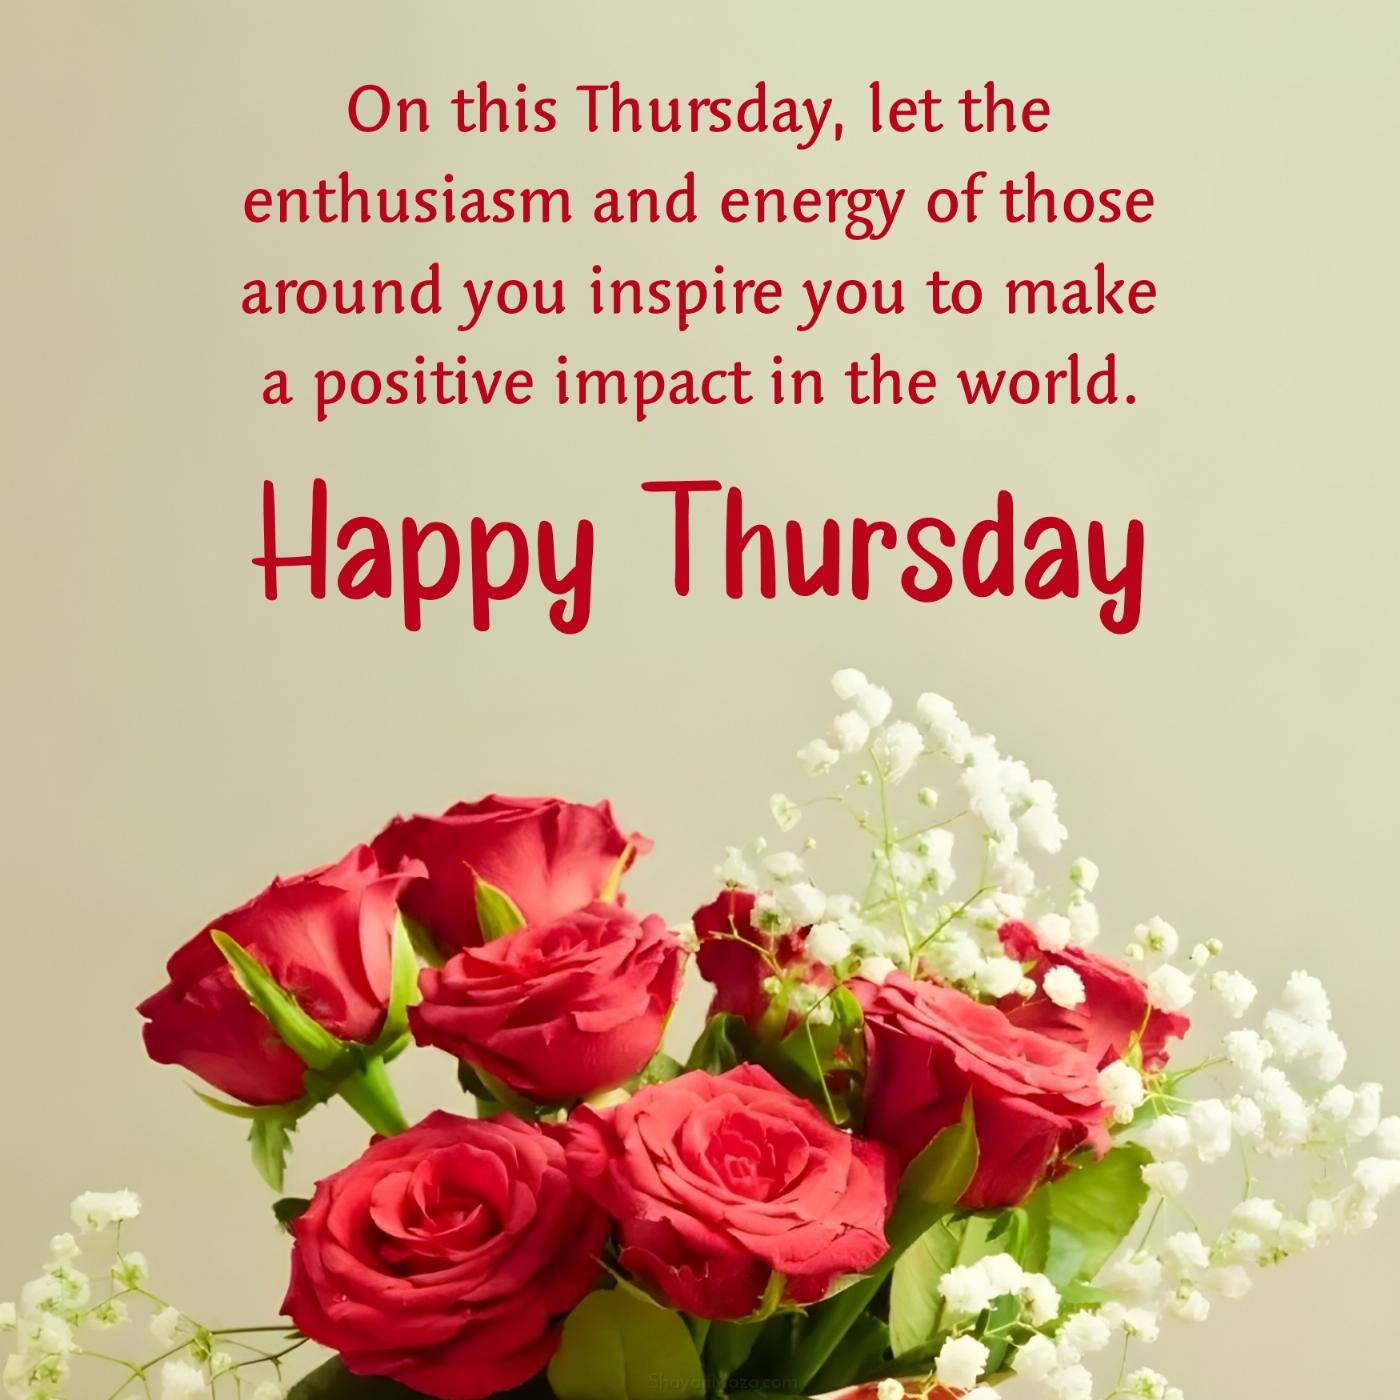 On this Thursday let the enthusiasm and energy of those around you